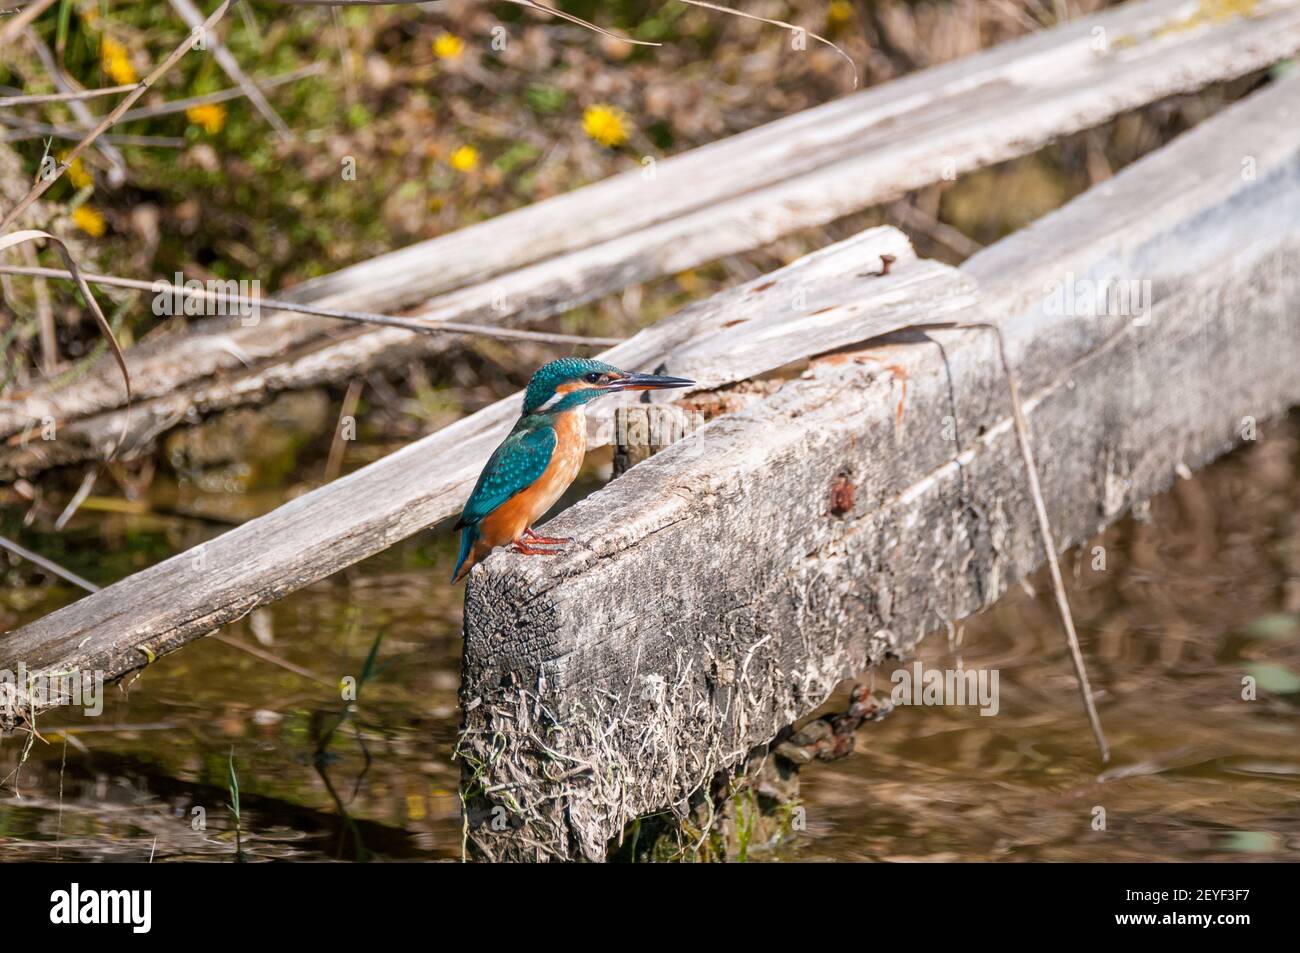 common kingfisher, Alcedo atthis, perched on a piece of wood, Ebro delta, Catalonia, Spain Stock Photo